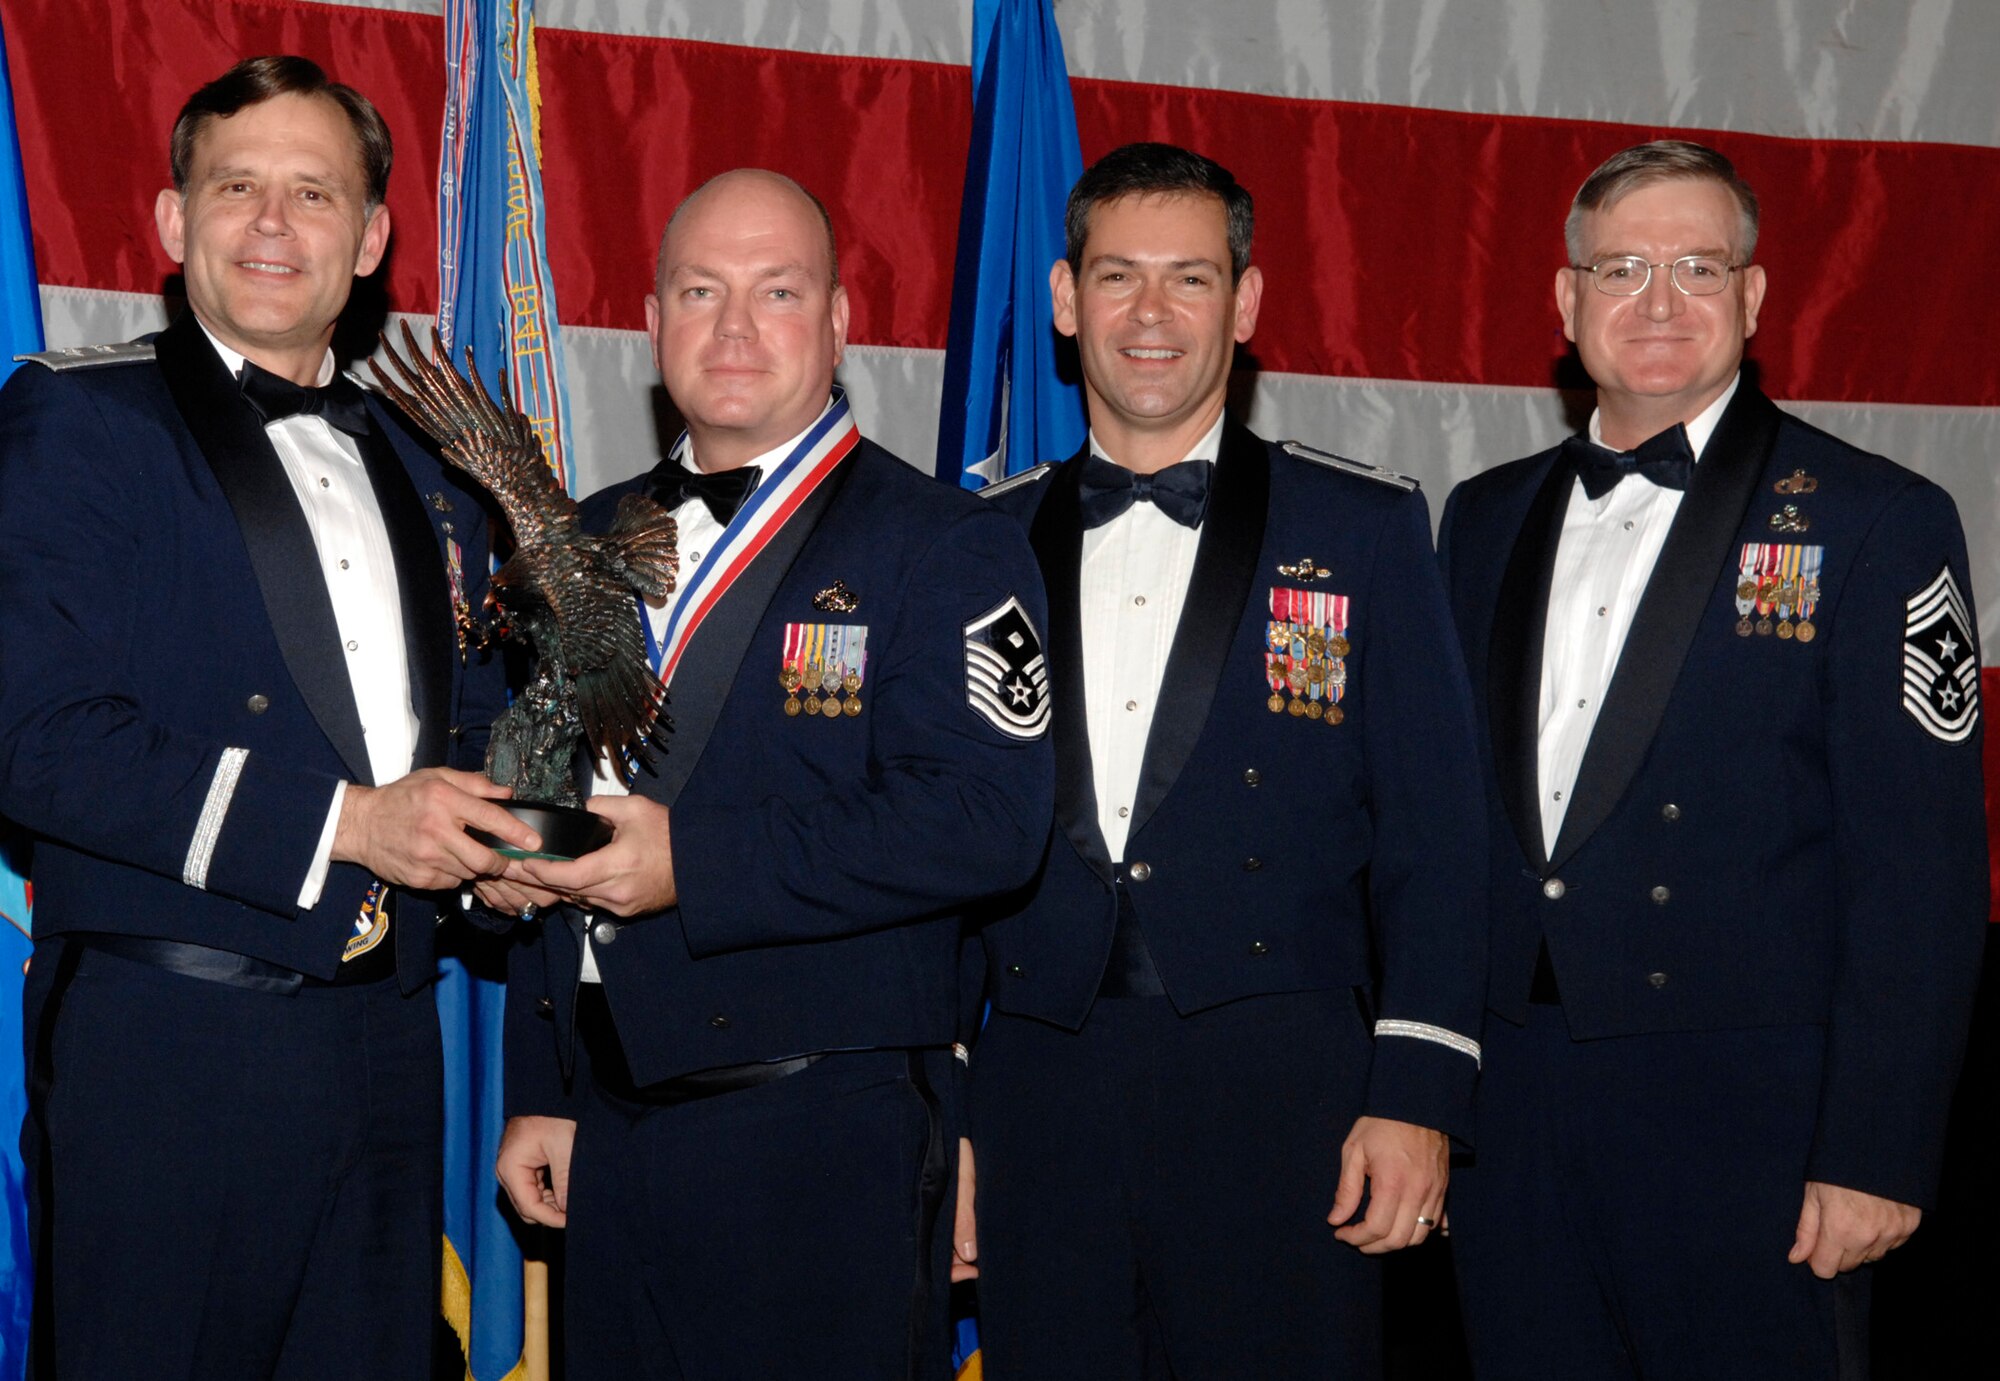 Master Sgt. Roy Grubbs won the 53d Wing First Sergeant of the Year Award during the annual awards banquet Jan. 31 at the Emerald Coast Conference Center.  The night’s guest speaker and former 53d commander, Maj. Gen. (retired) Jack Catton (left) presented the awards.  Col. Ken Wilsbach, 53d Wing commander, and Chief Master Sgt. Randy Salefske, 53d Wing command chief, also stand with the winner.  U.S. Air Force photo.